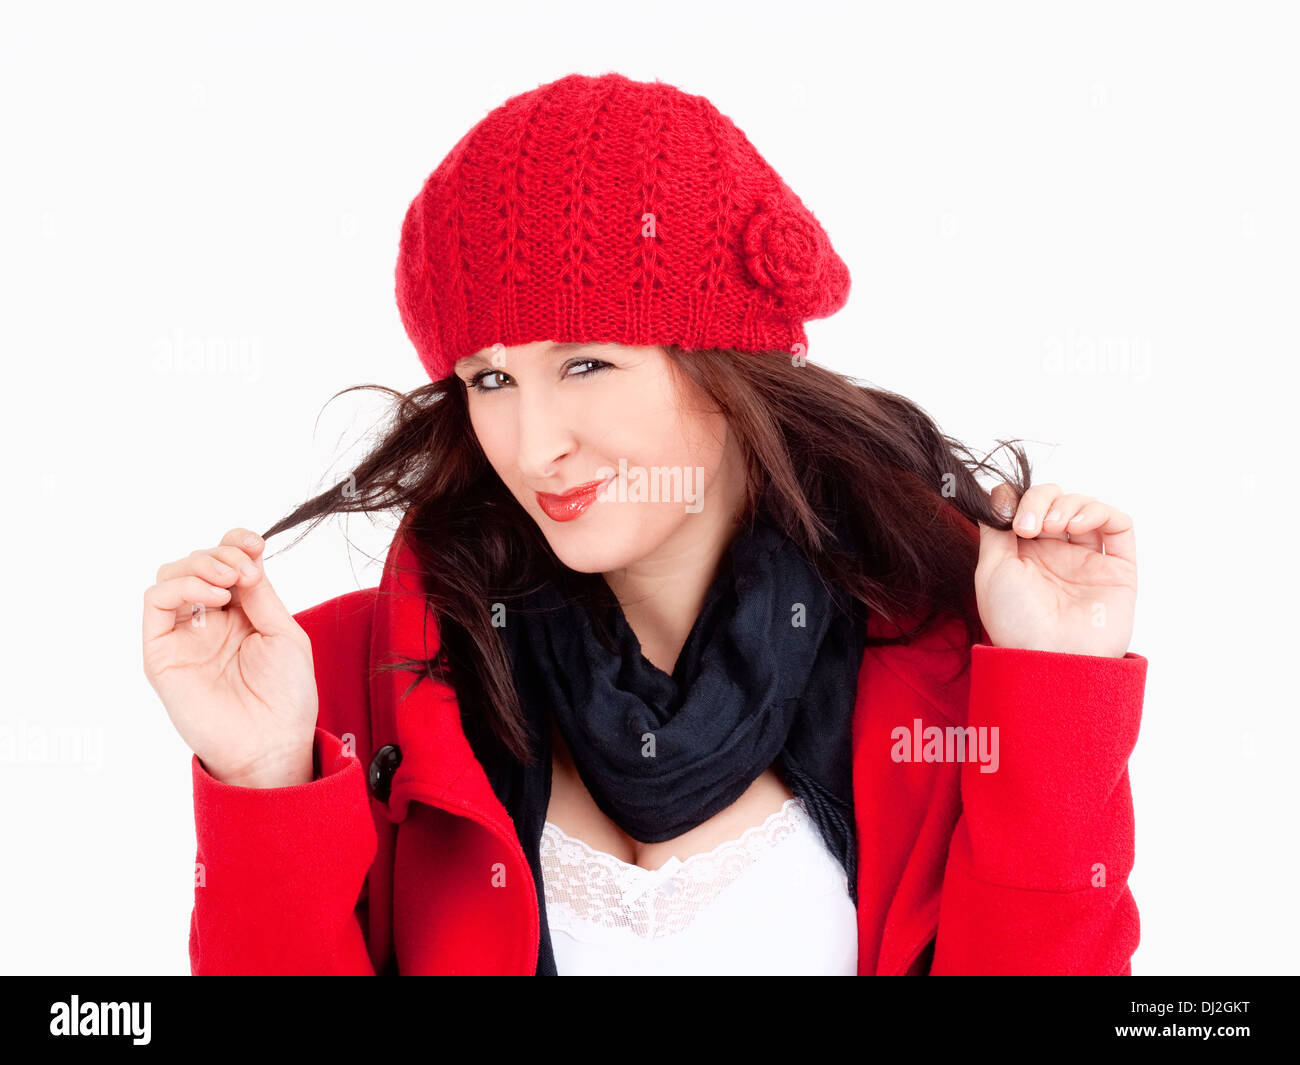 Young Woman in Red Coat and Cap Smiling - Isolated on White Stock Photo